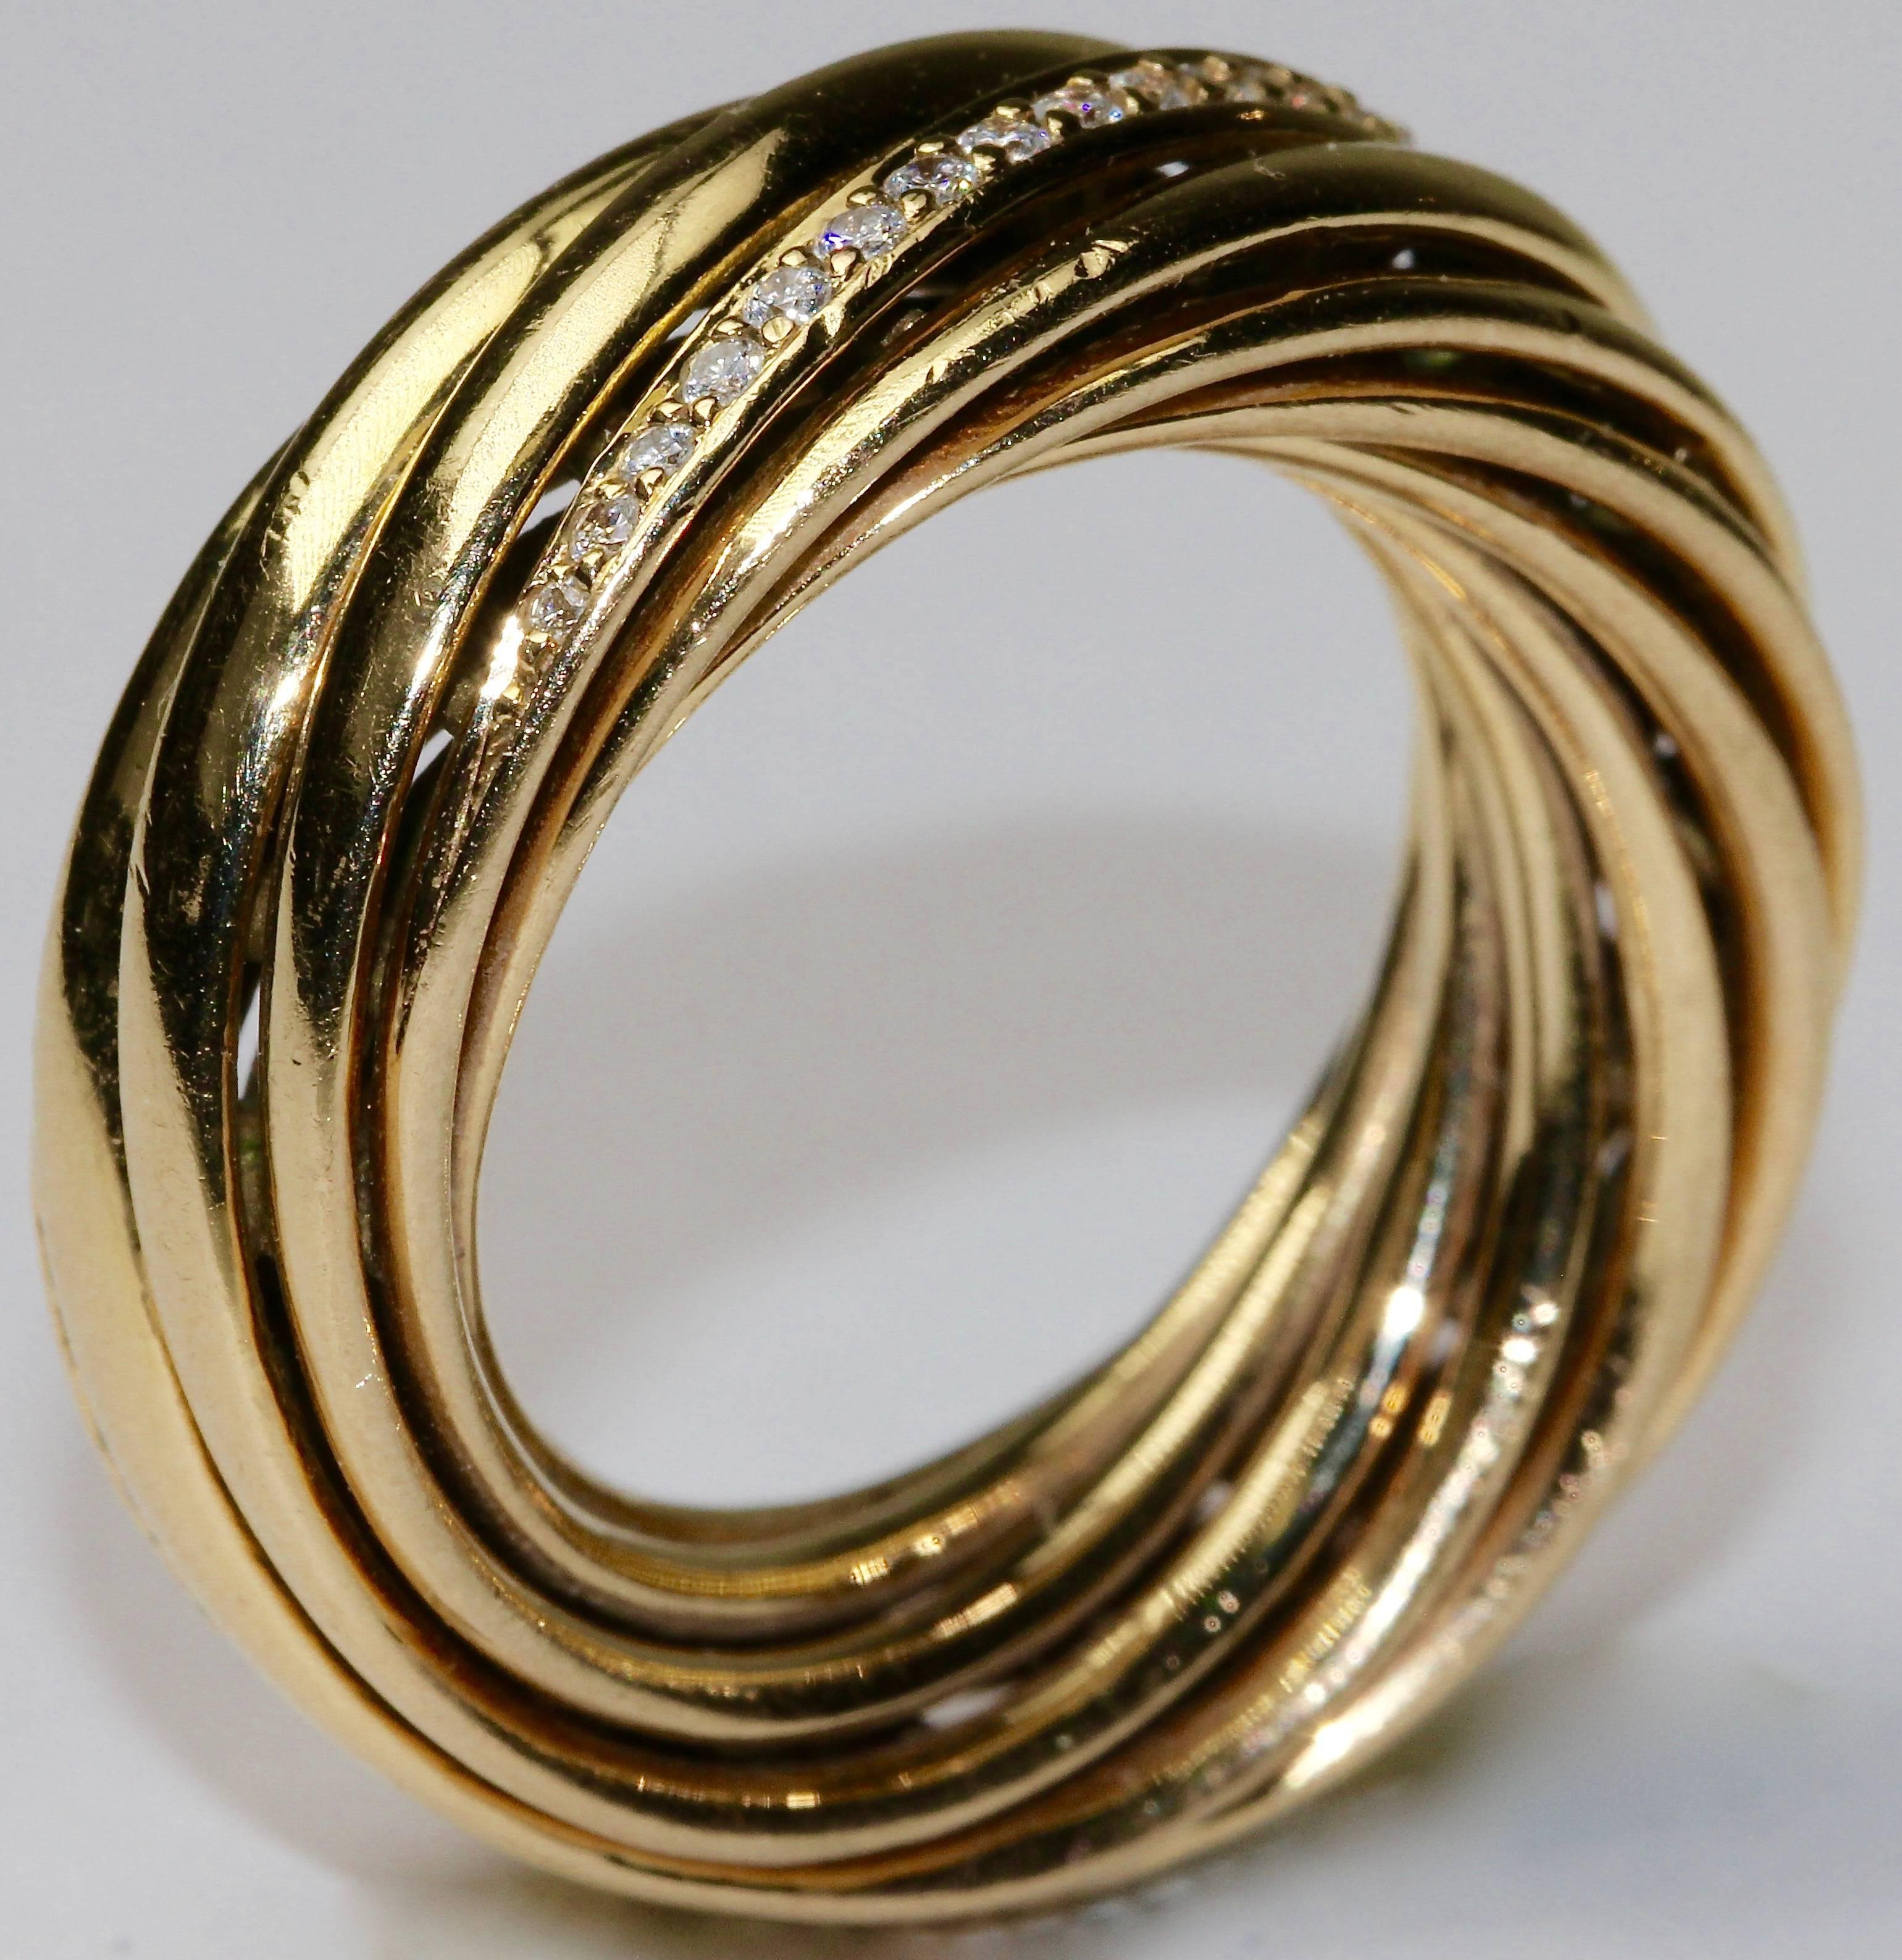 High-quality gold ring 